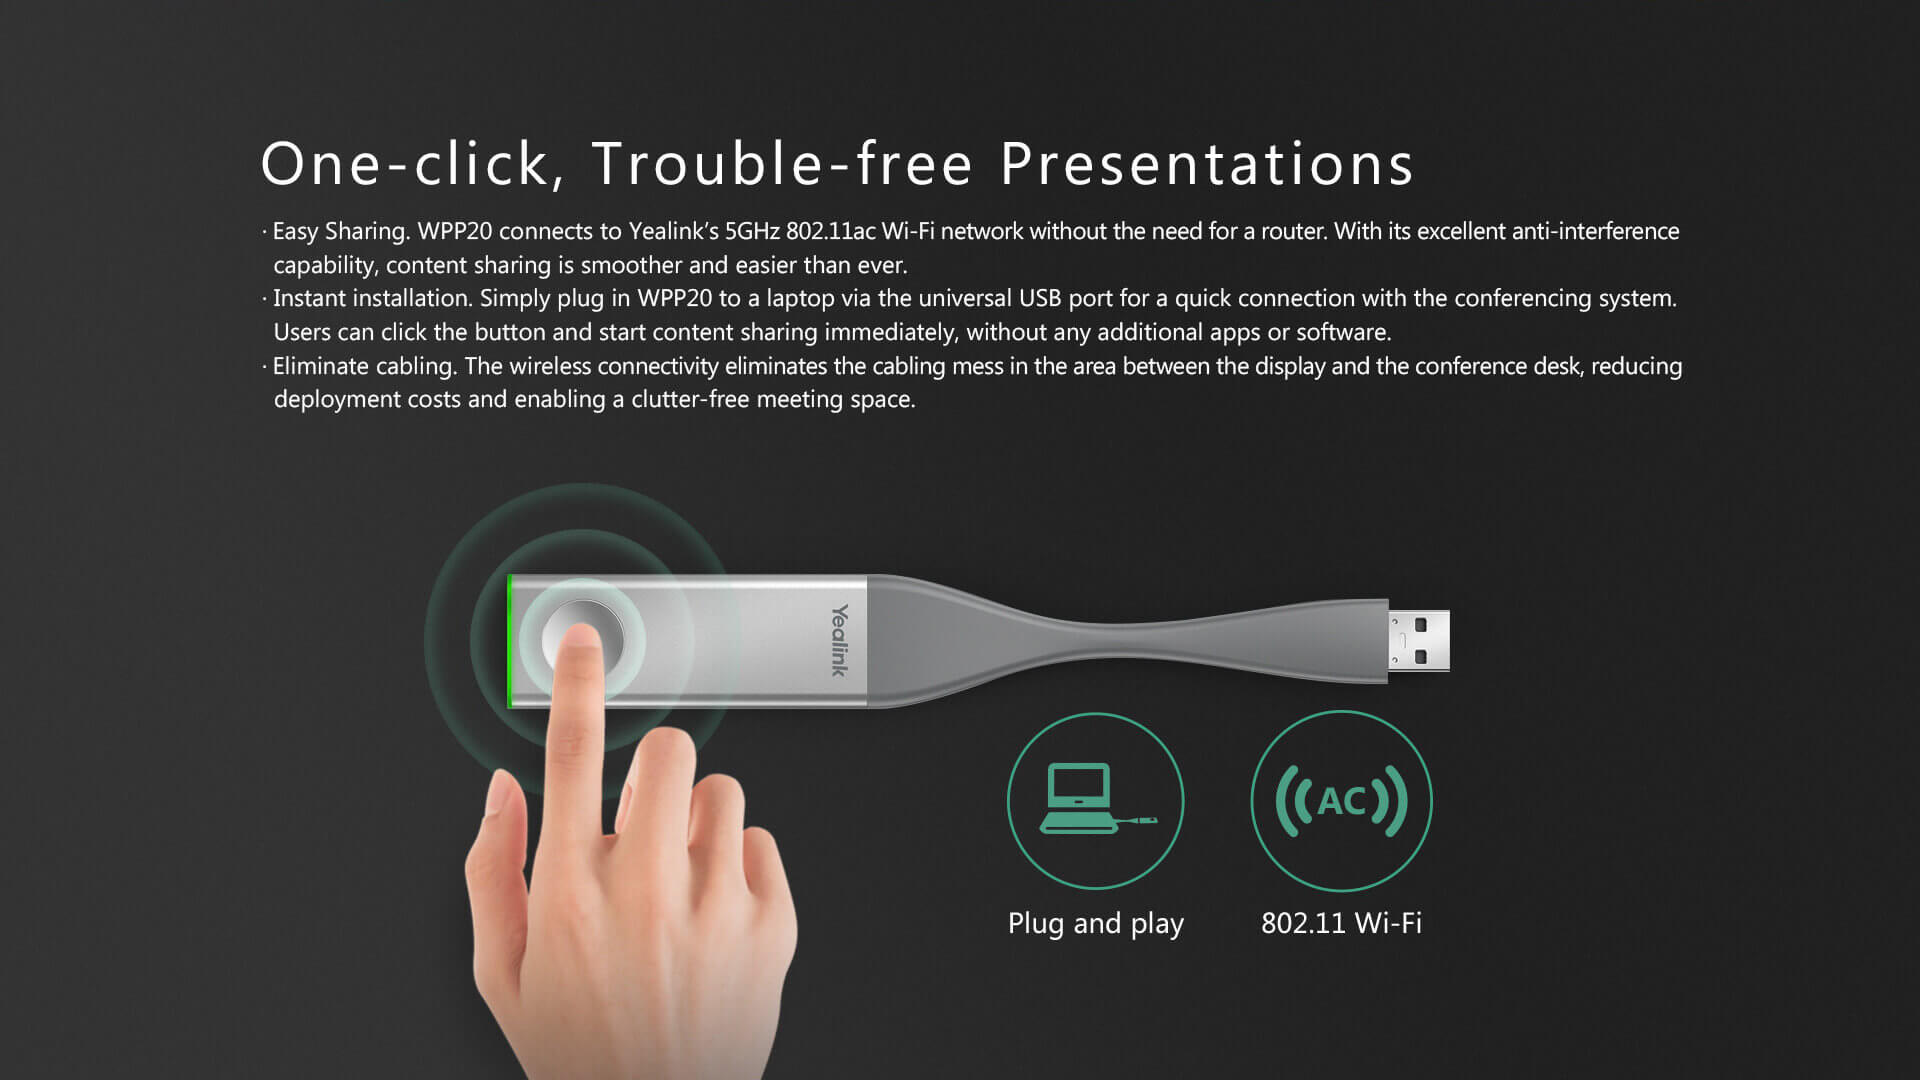 One-click, trouble-free presentations